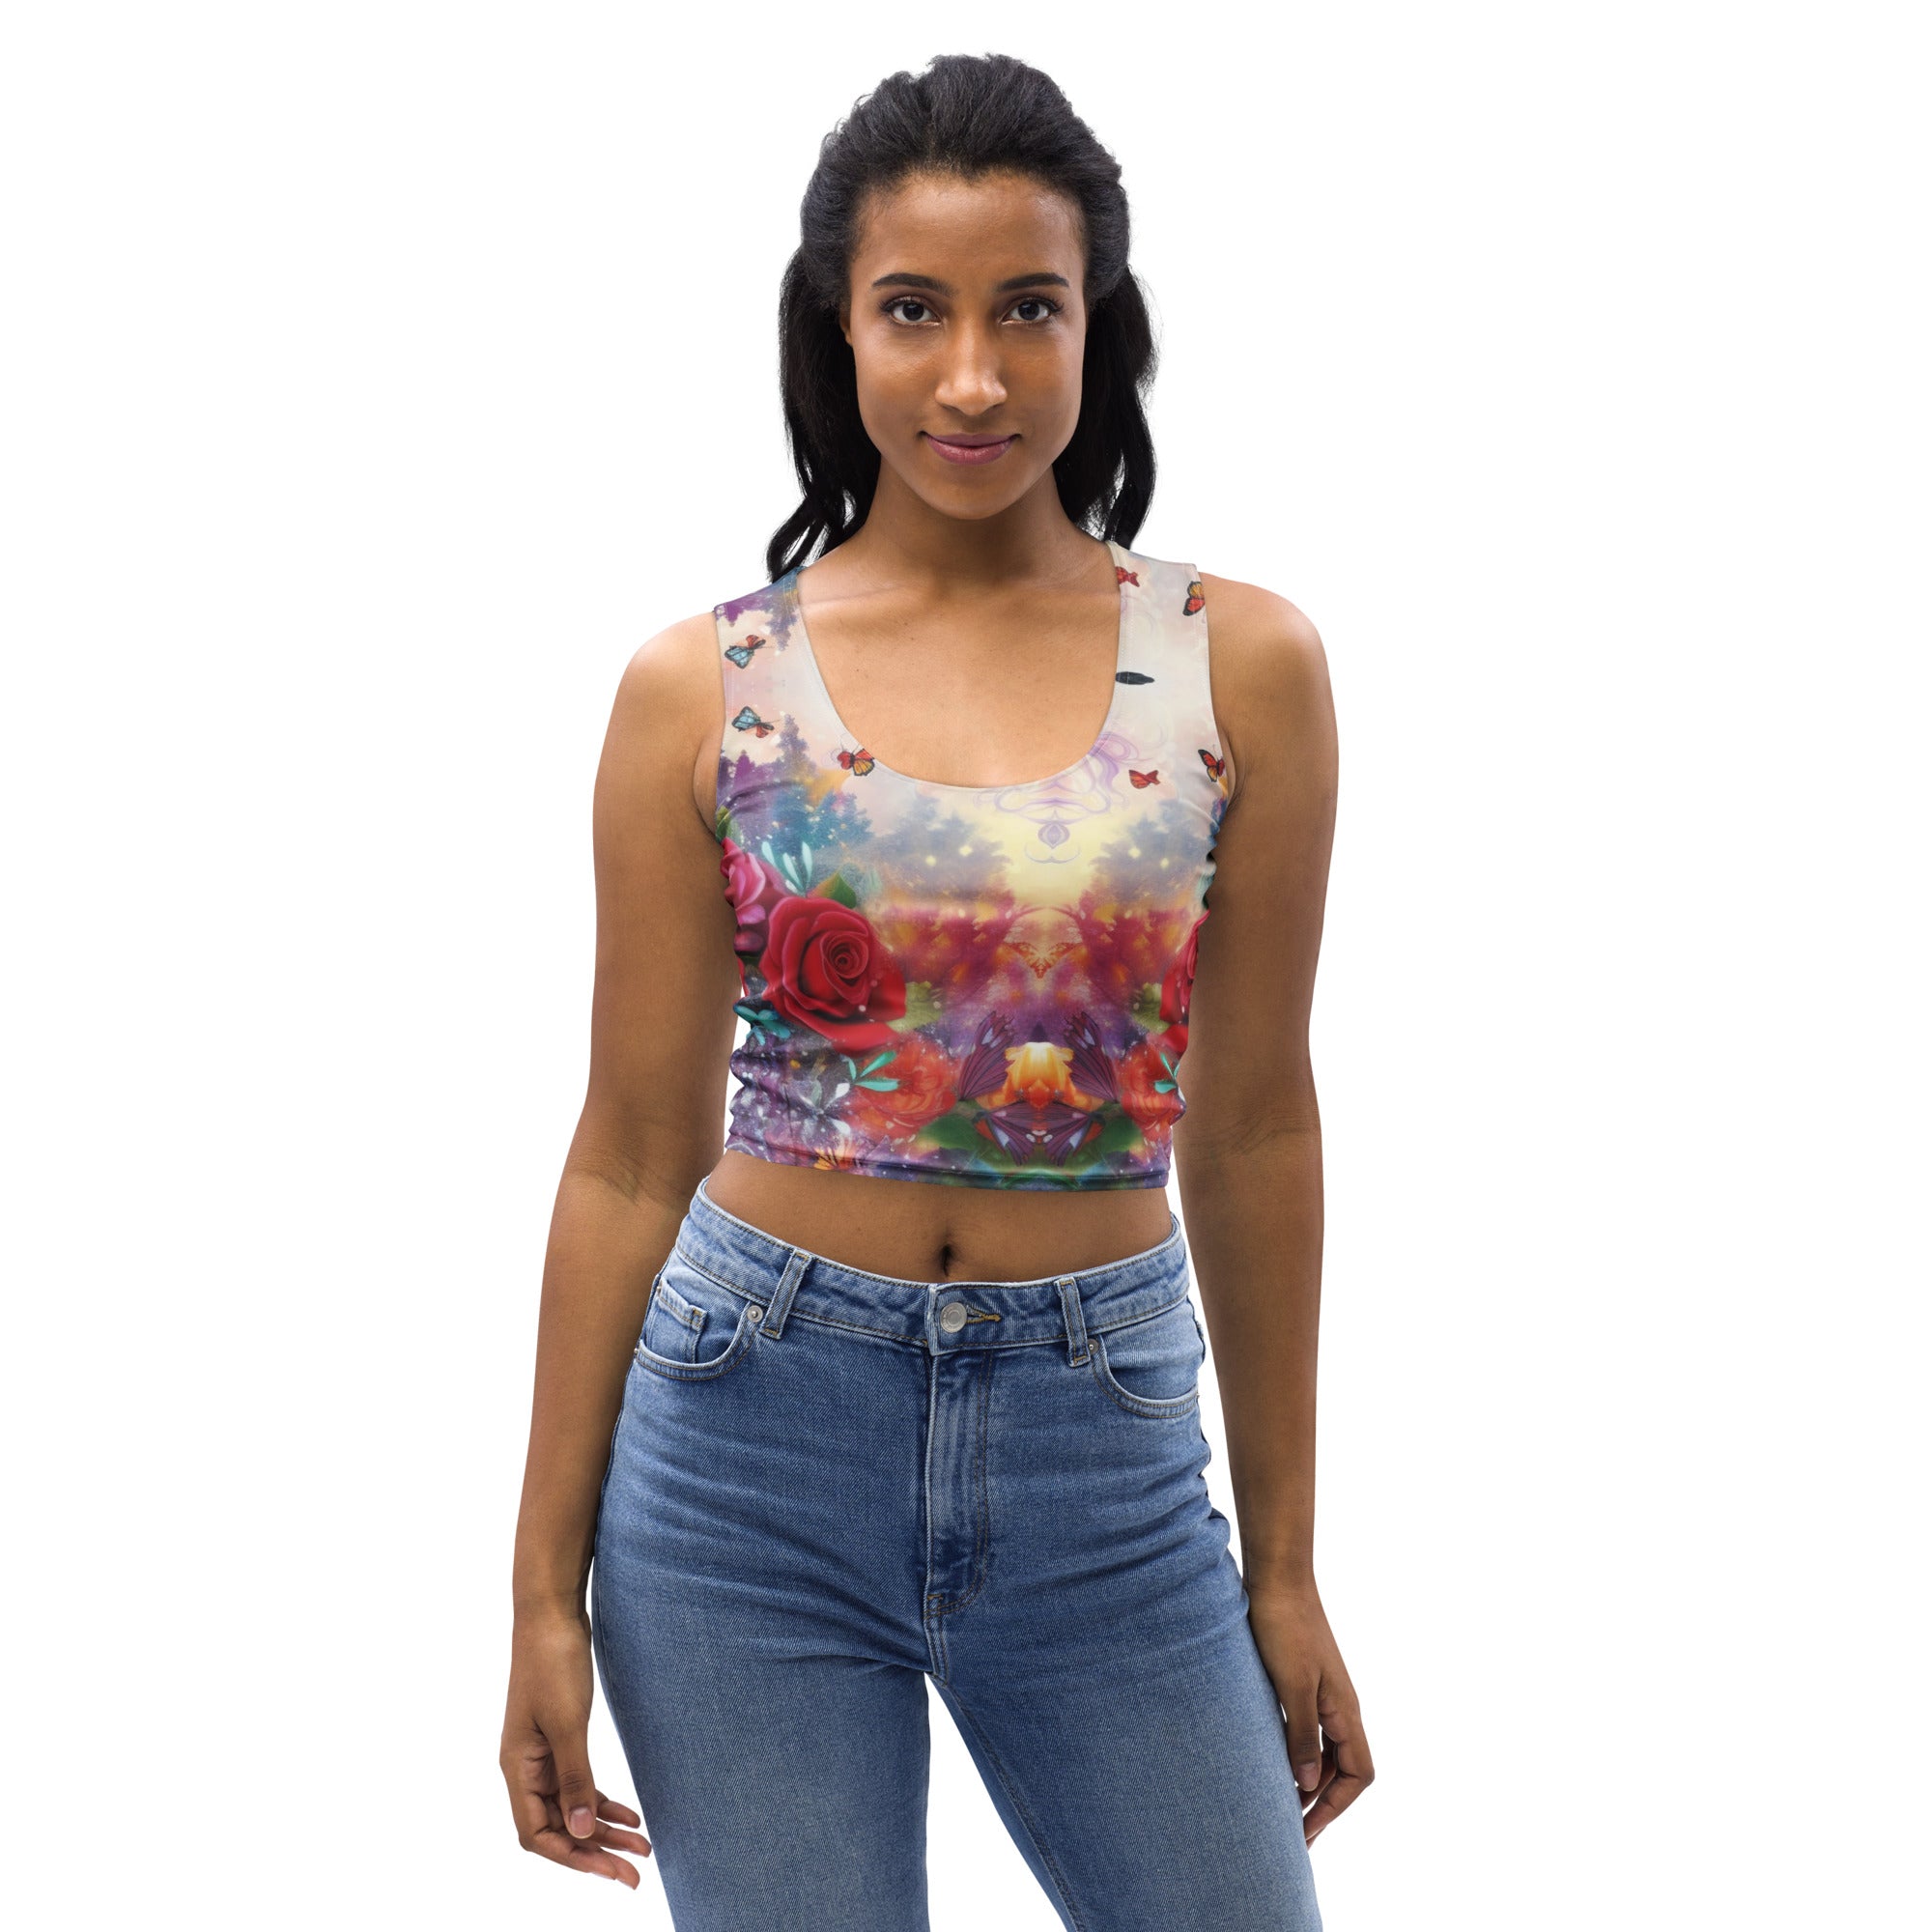 Ignite Your Feminine Spirit: Blossom with Style in our Flower Fairy Crop Top!